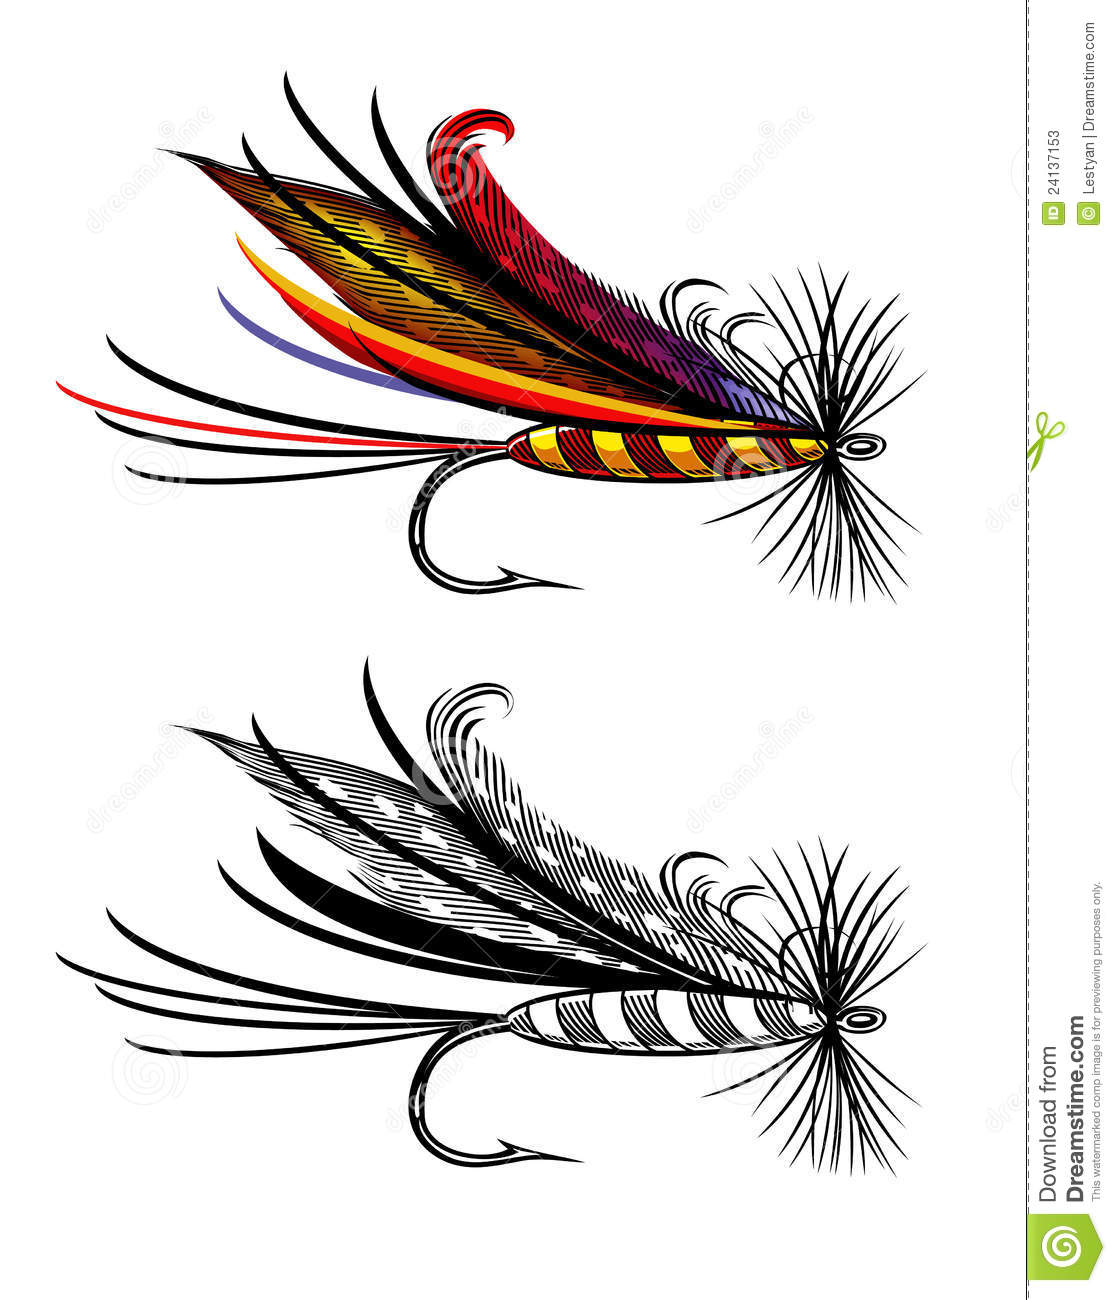 Vector Illustration Of Fishing Fly Stock Photos   Image  24137153